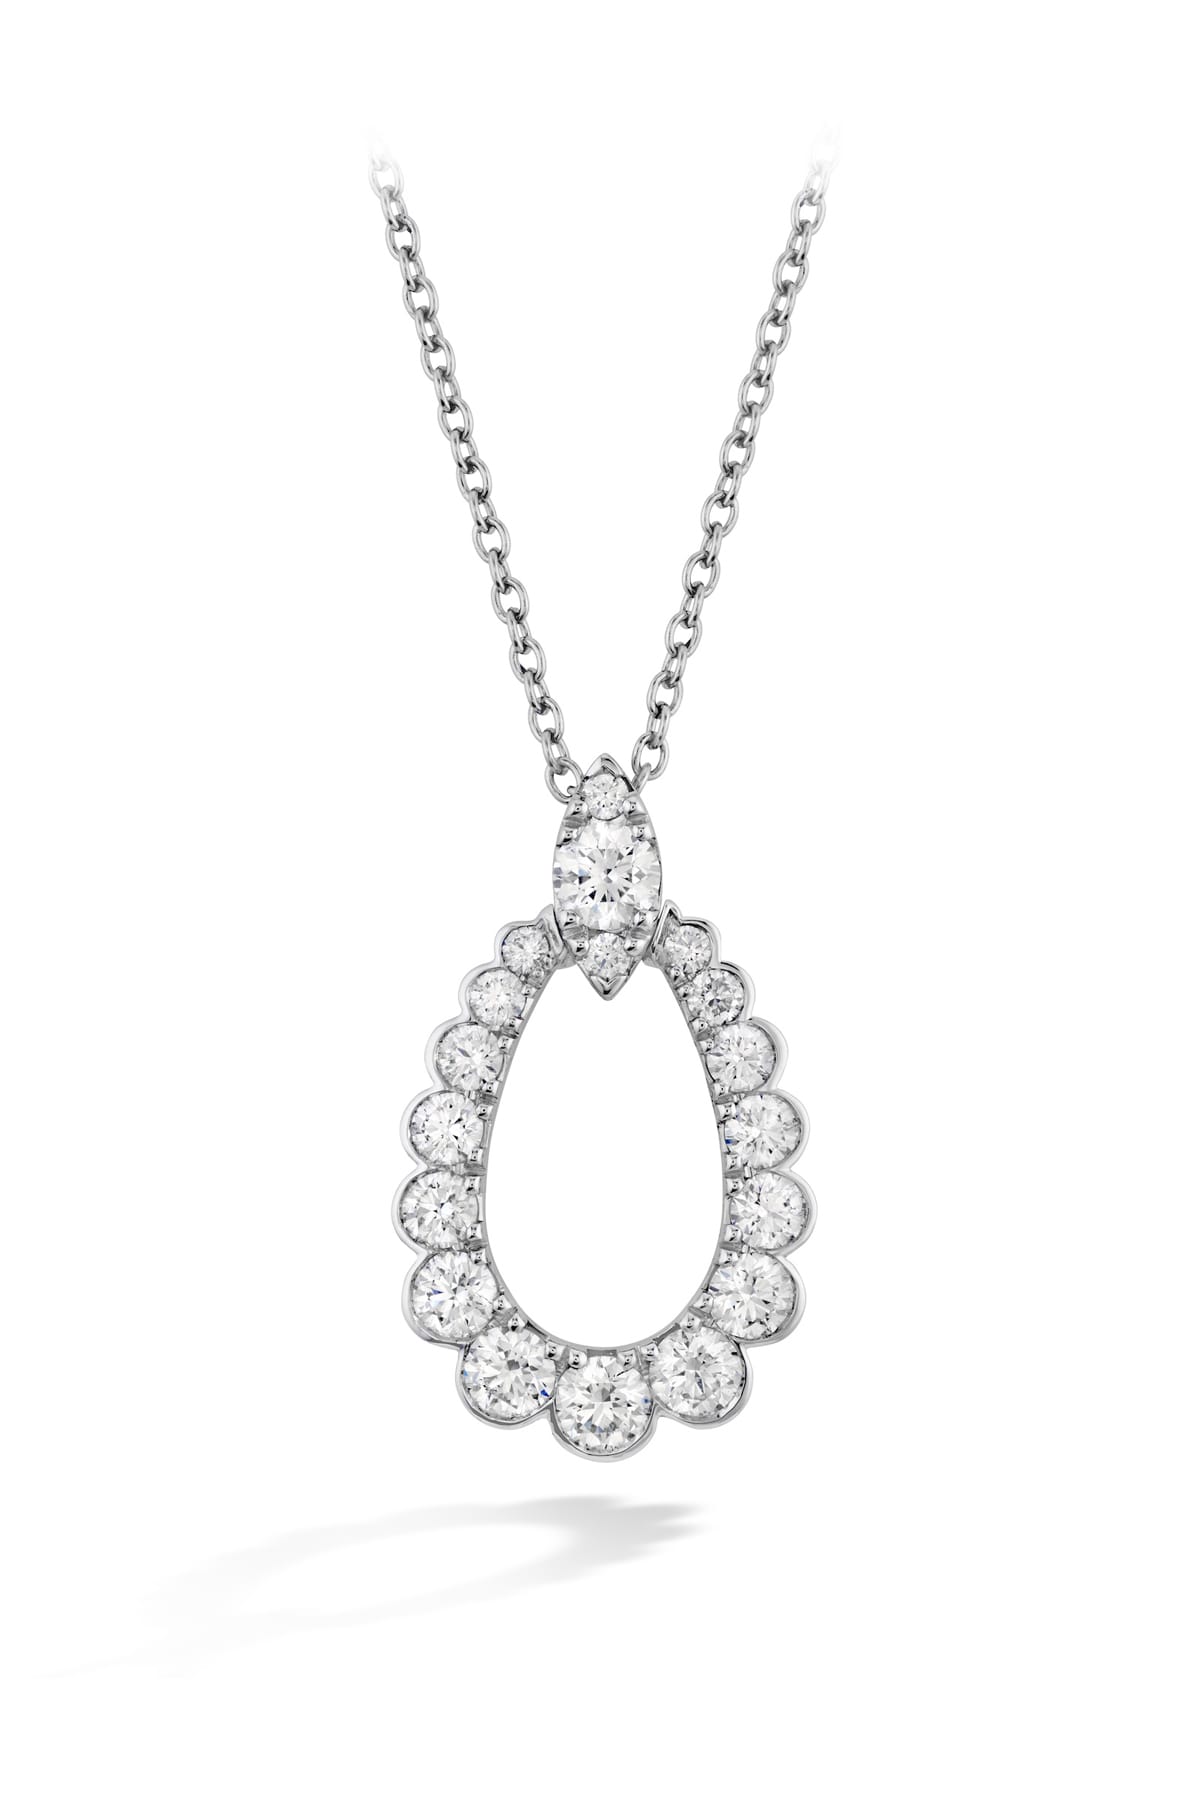 Aerial Regal Teardrop Pendant From Hearts On Fire available at LeGassick Diamonds and Jewellery Gold Coast, Australia.